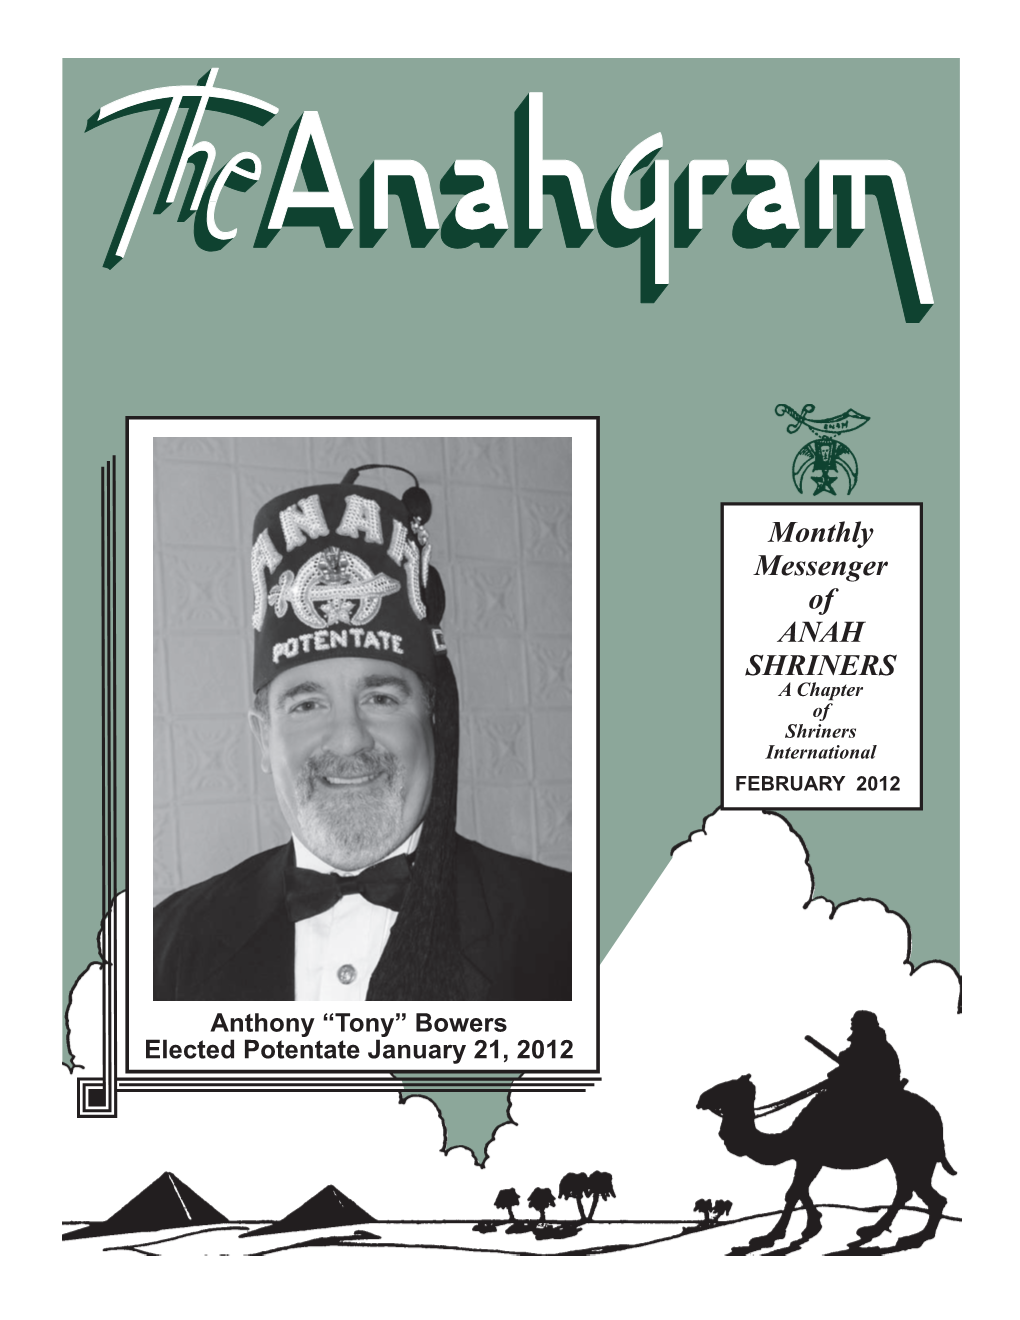 Monthly Messenger of ANAH SHRINERS a Chapter of Shriners Internationaljuly 2011 FEBRUARY 2012